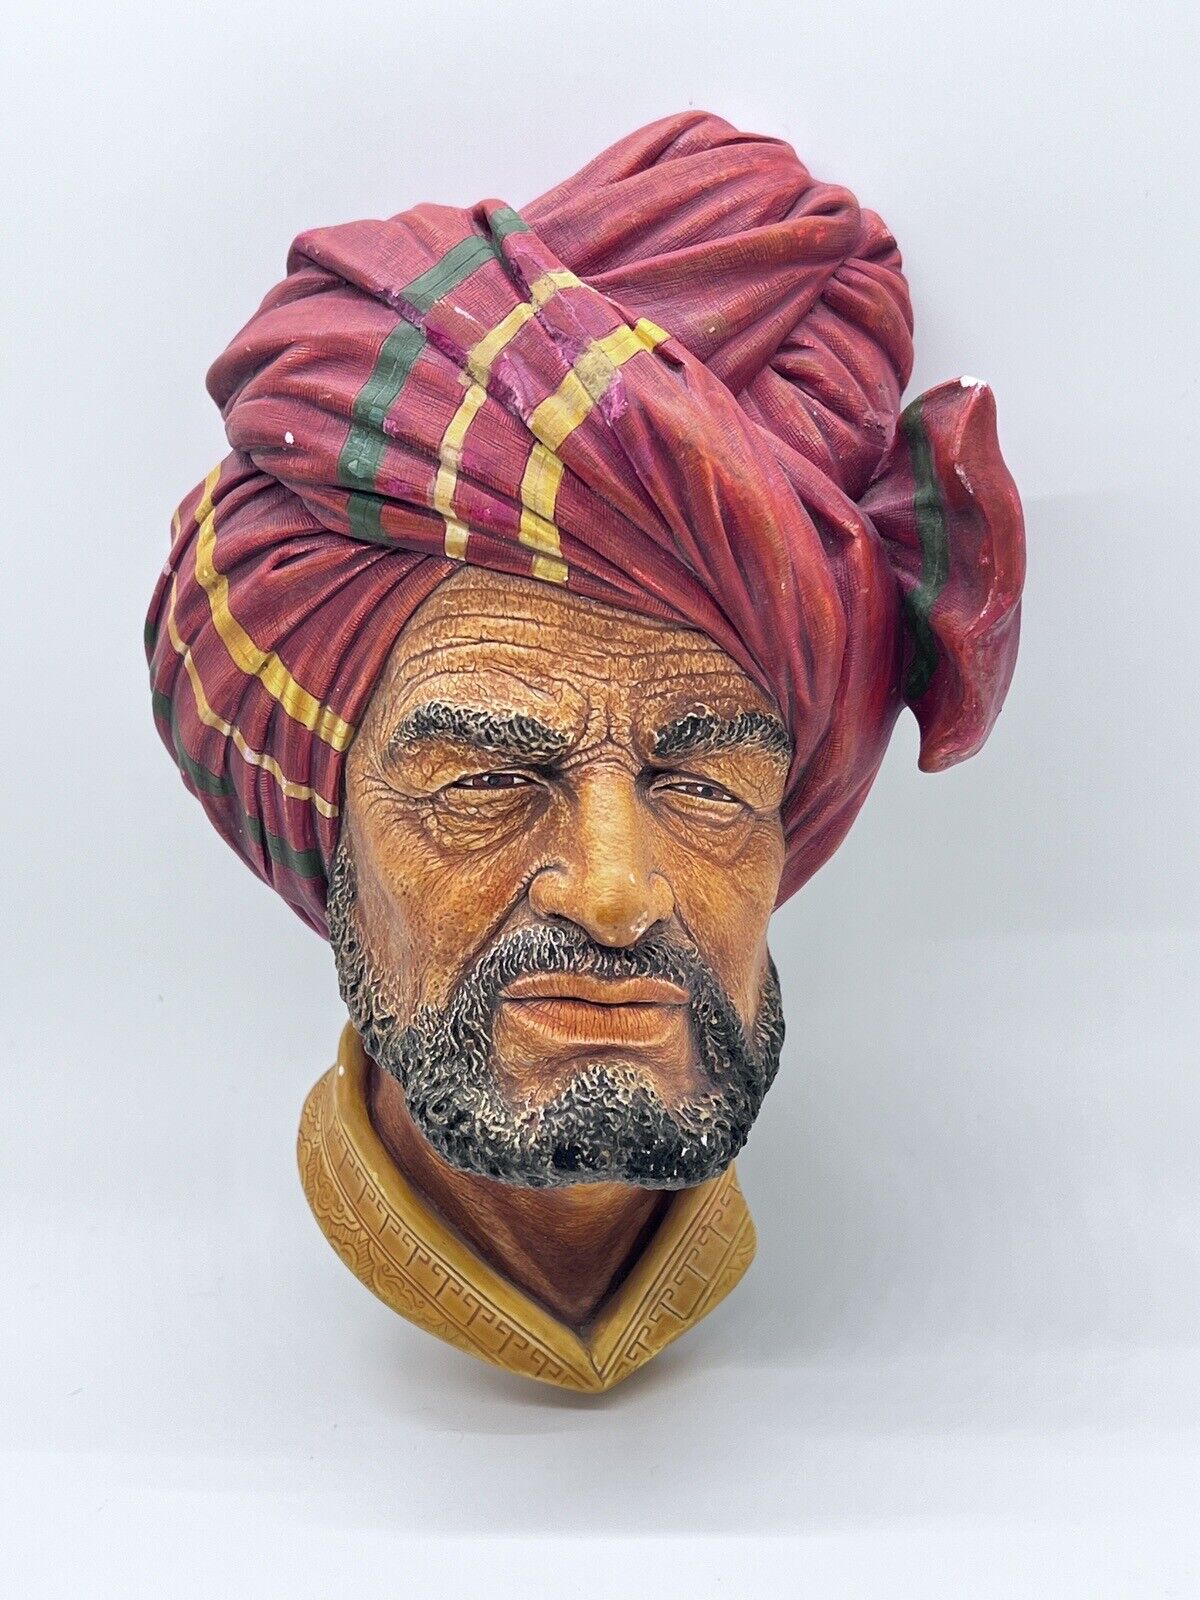 Vintage Bossons Abdhul the Arabian Chalkware Head 1950-60s Made In England